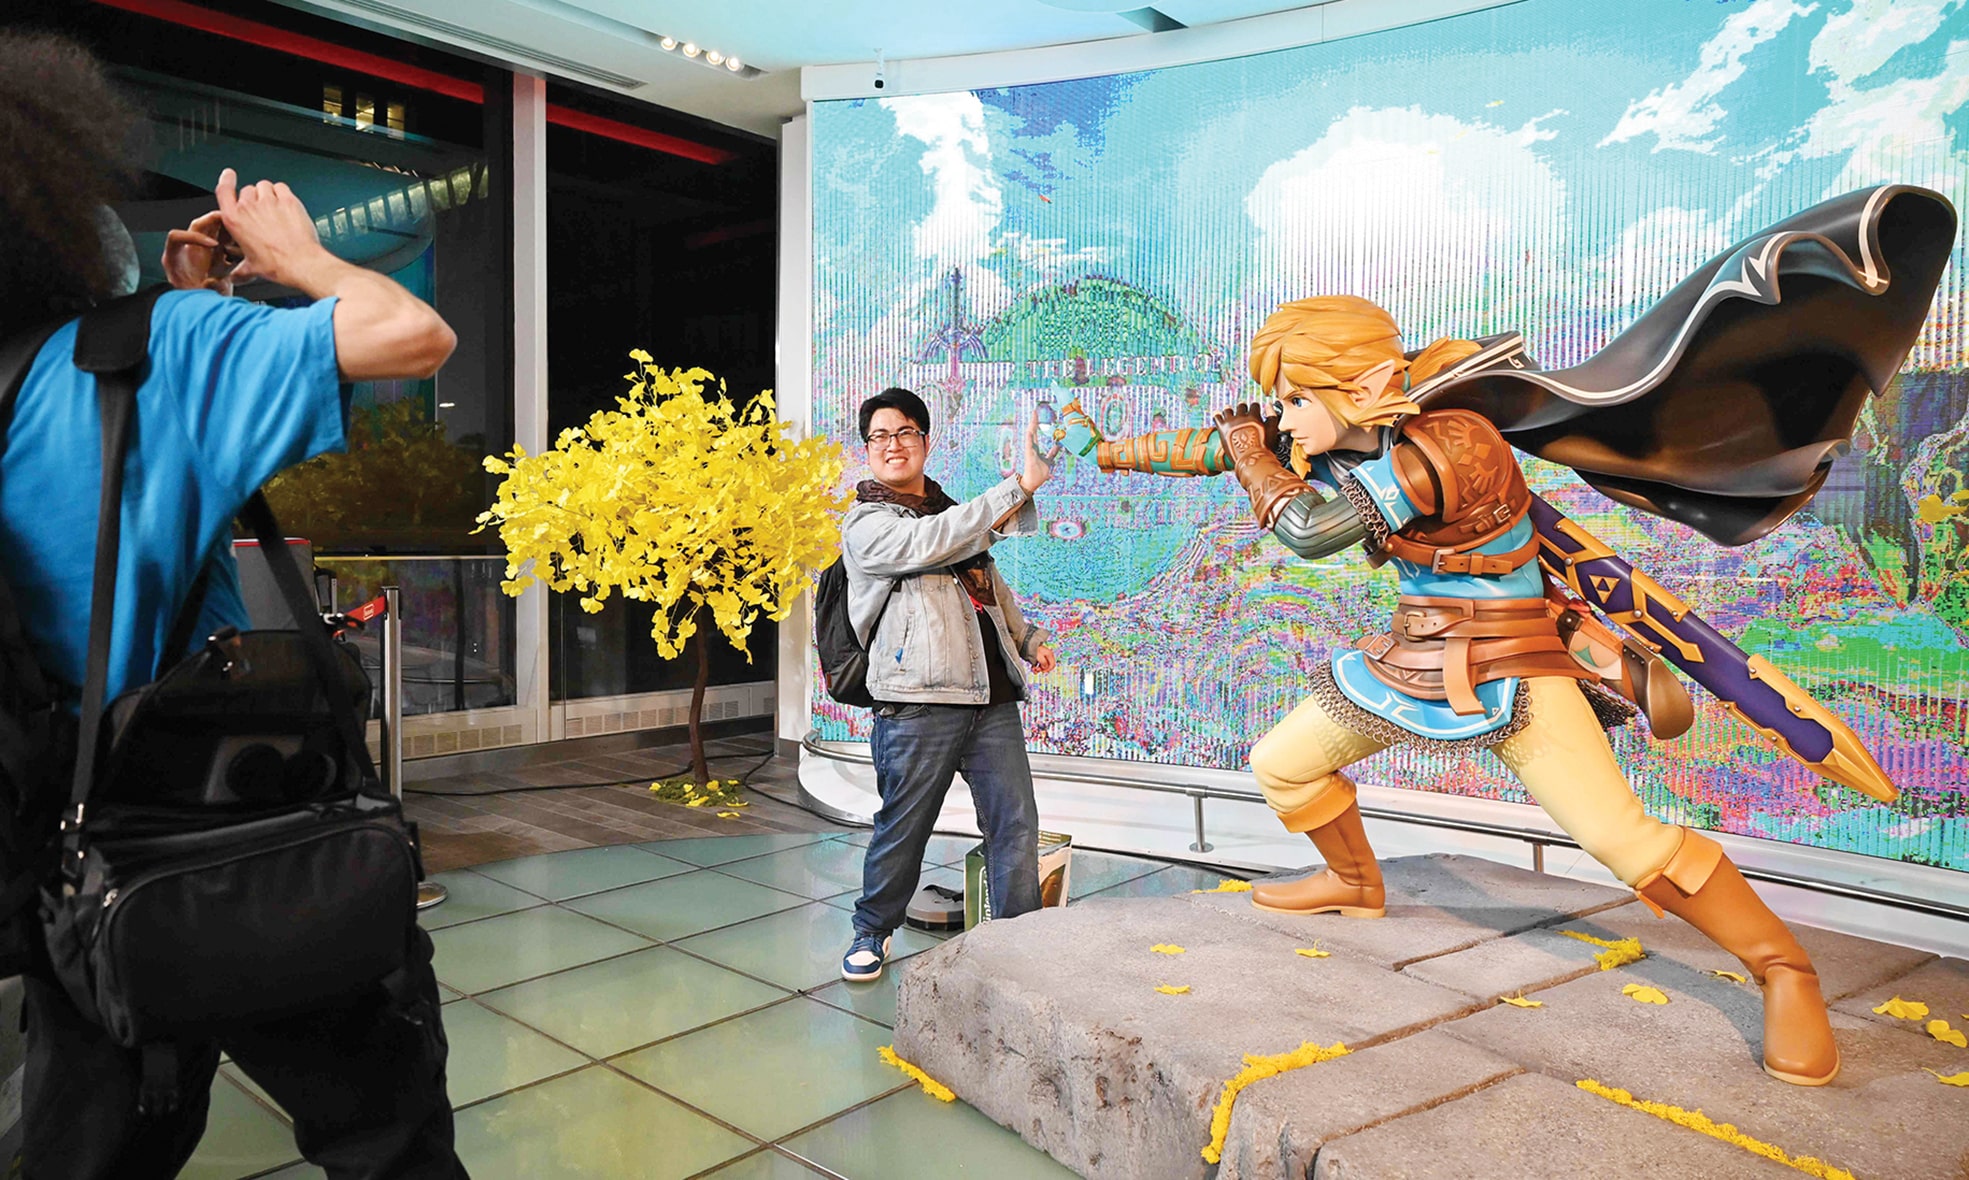 A customer poses for a photo with Zelda's character Link after purchasing 'The Legend of Zelda: Tears of the Kingdom'.